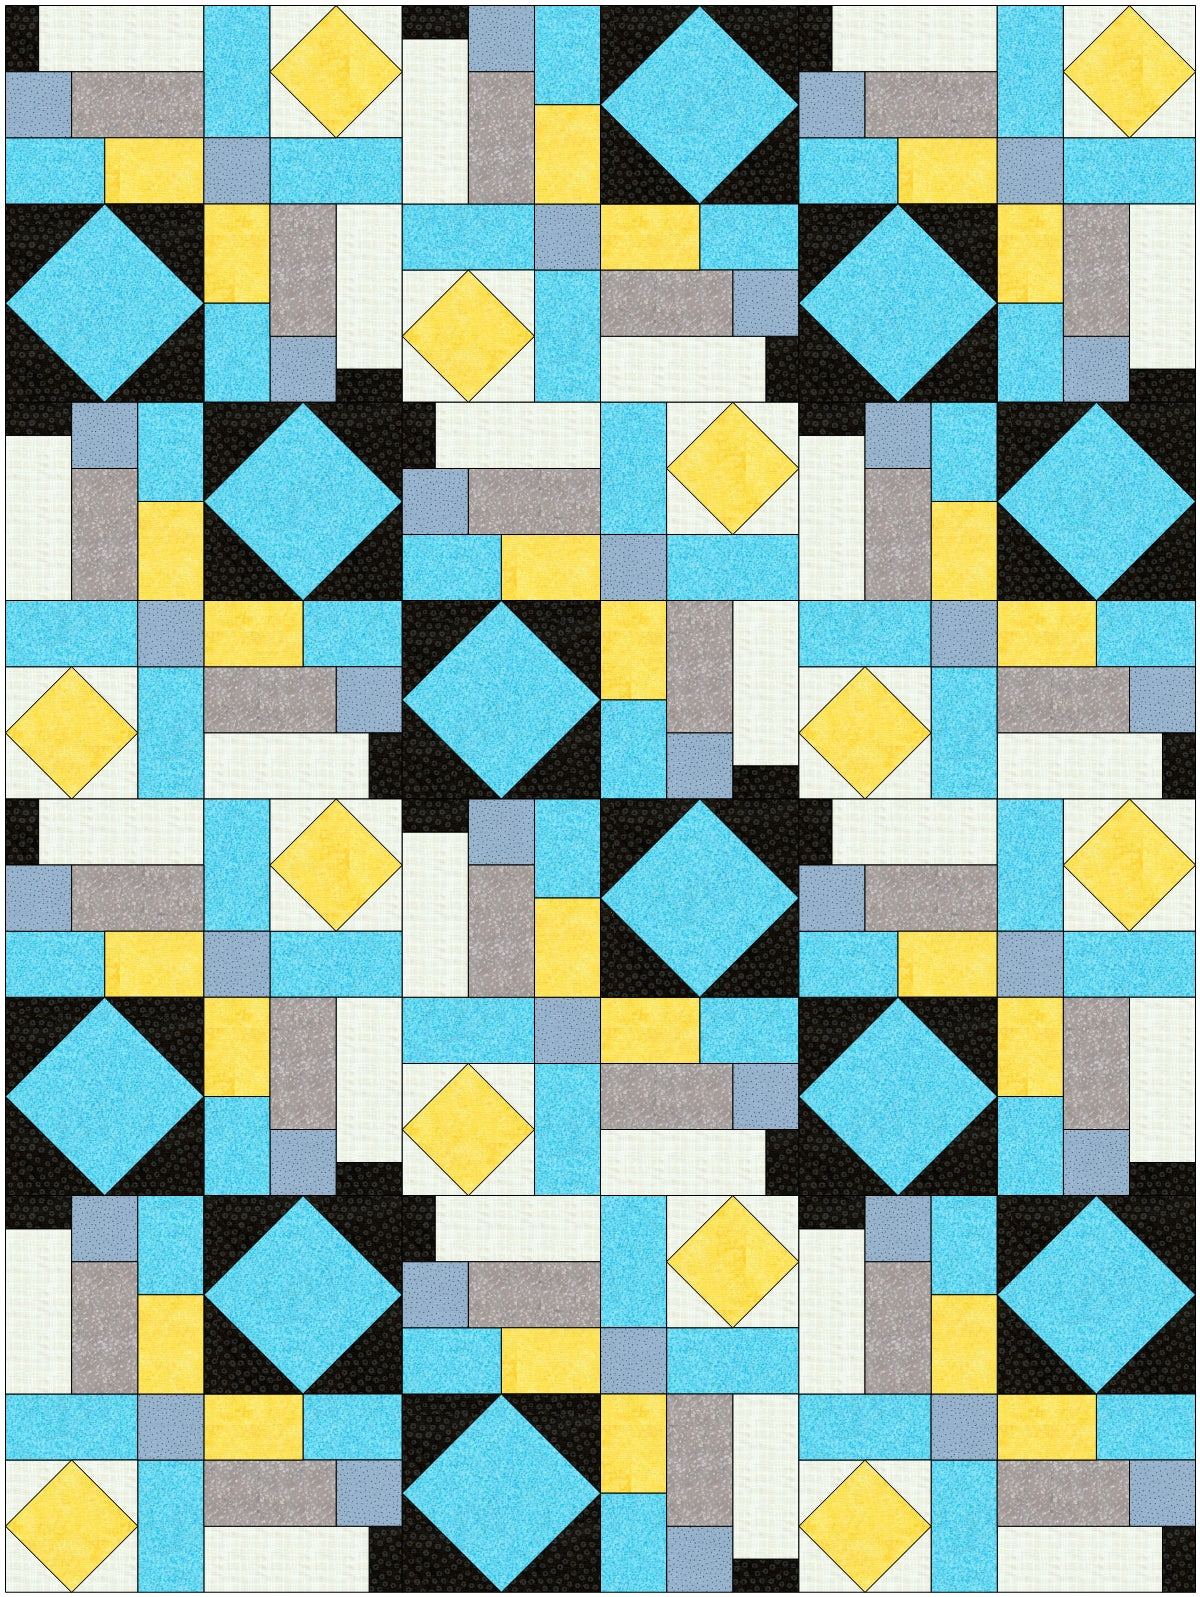 Stained Glass Downloadable Pattern by Beaquilter